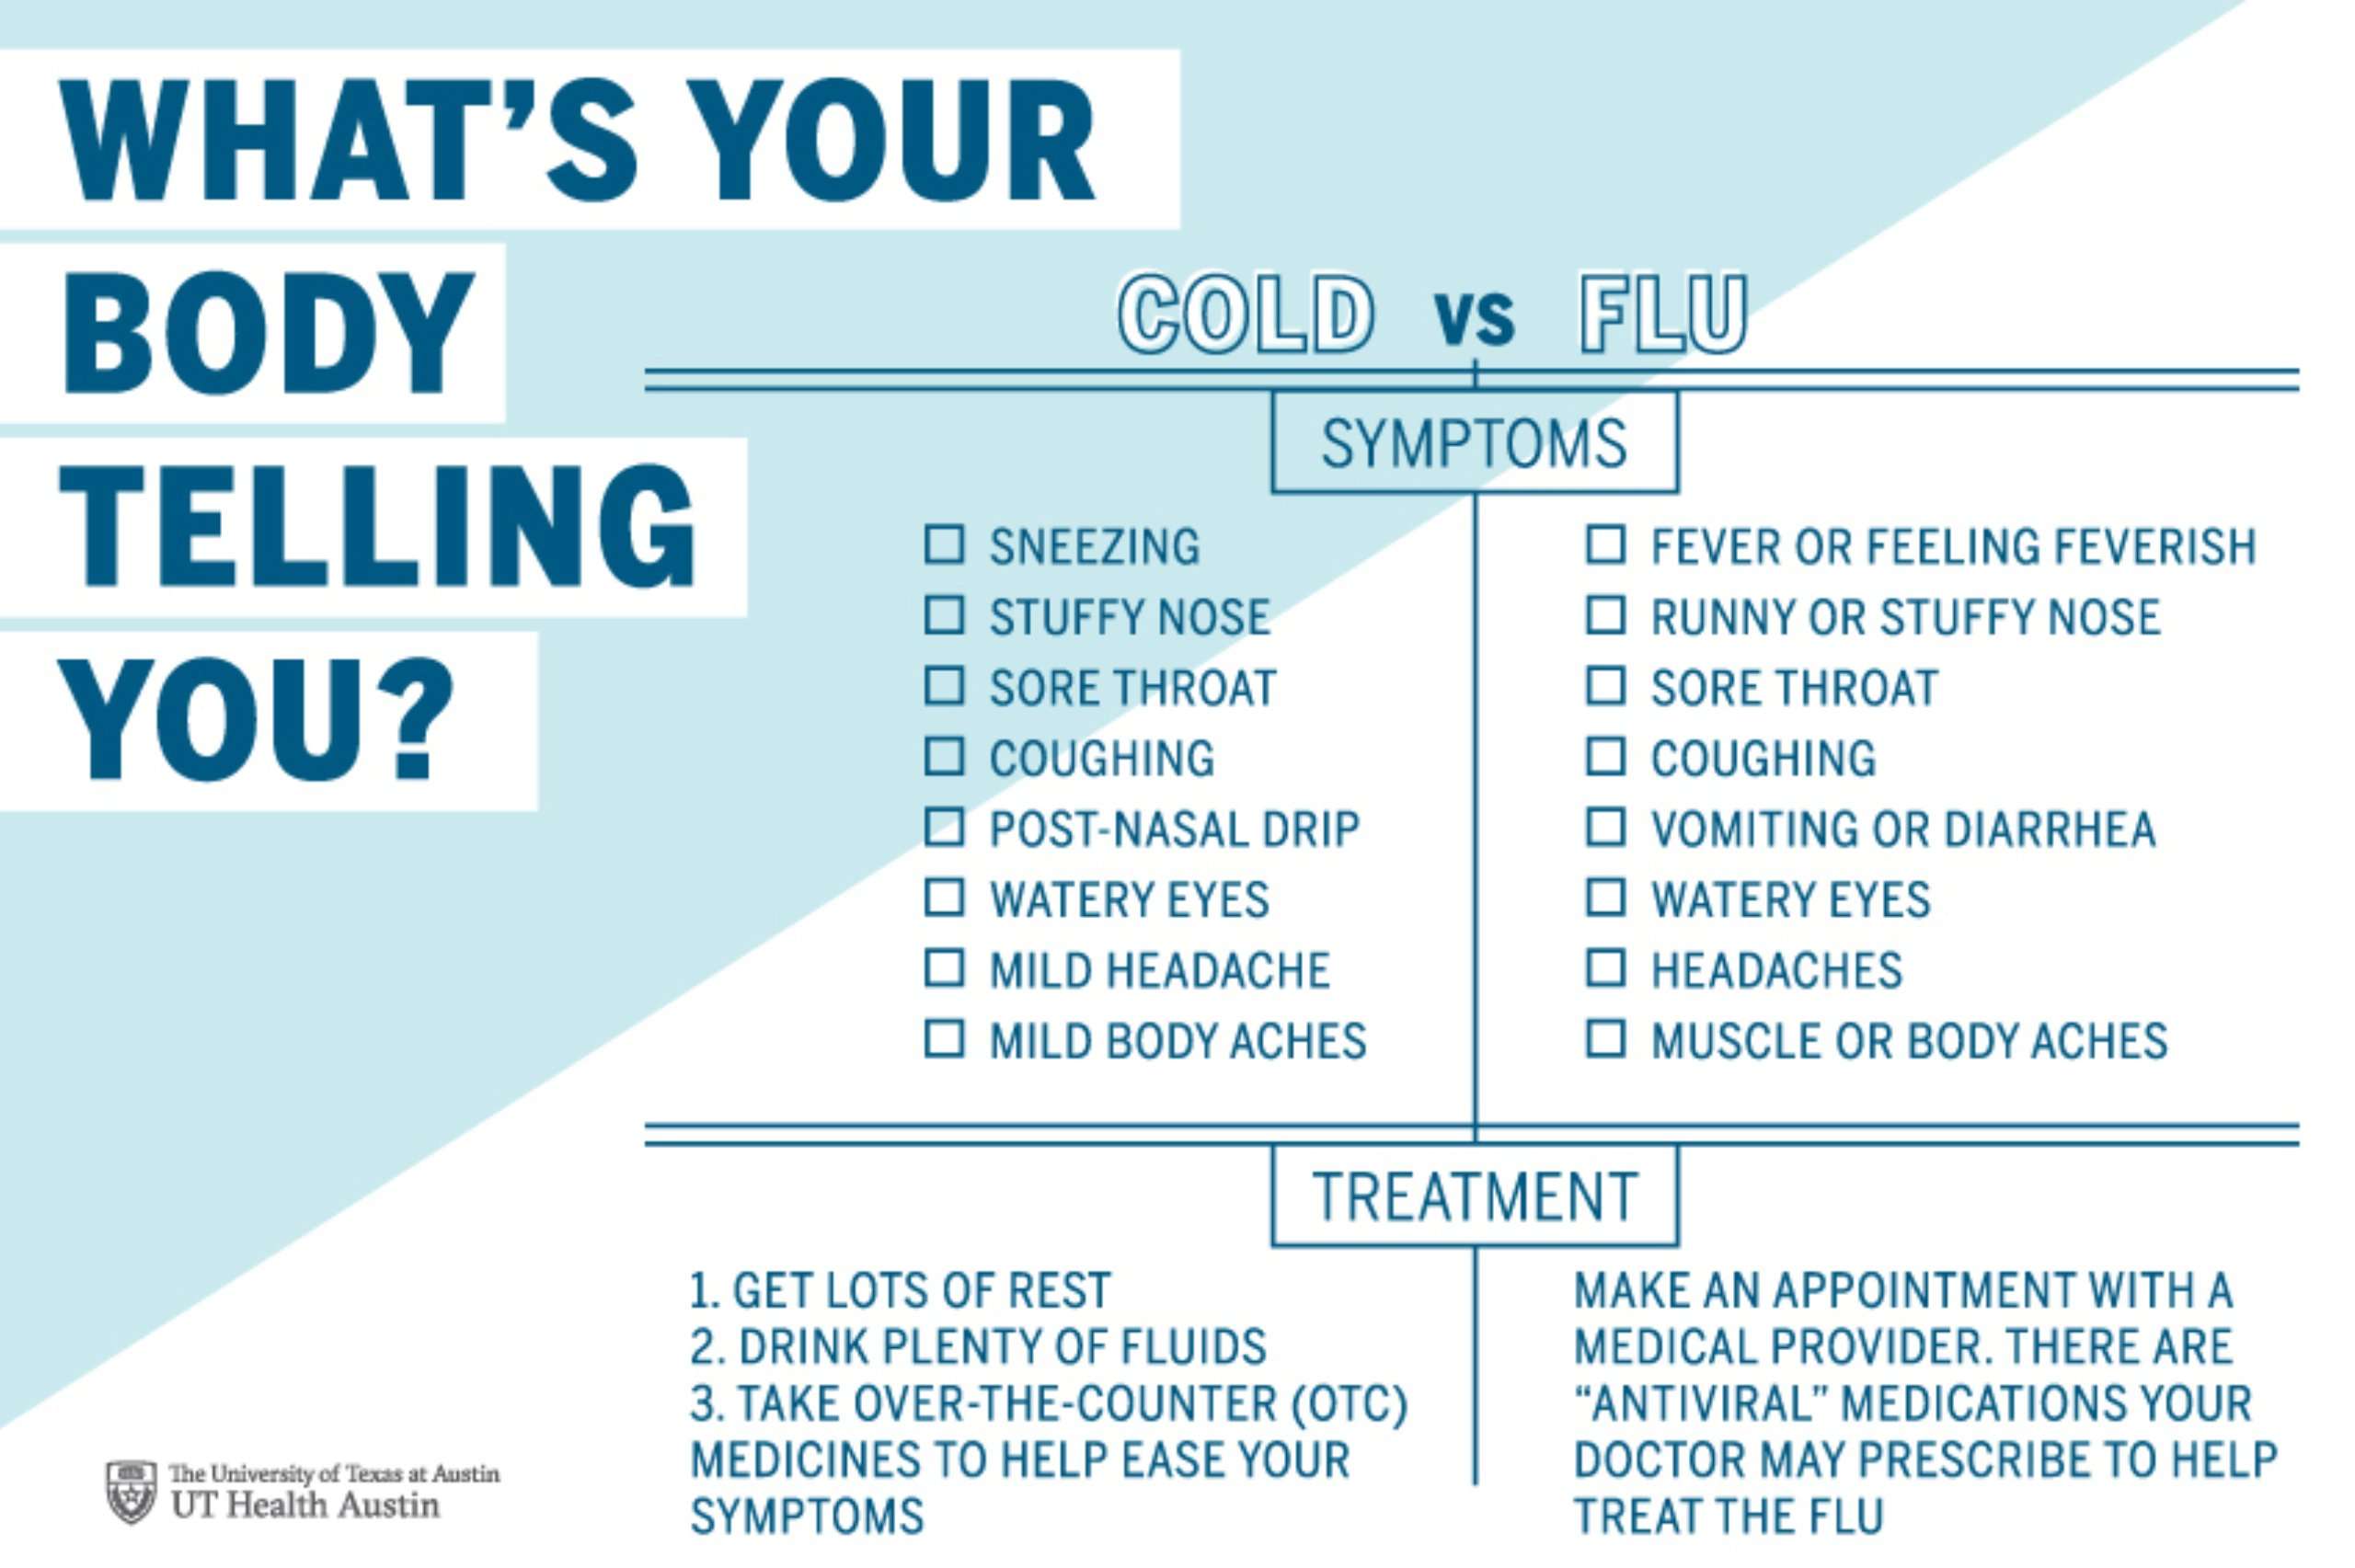 Know the difference between a cold and the flu